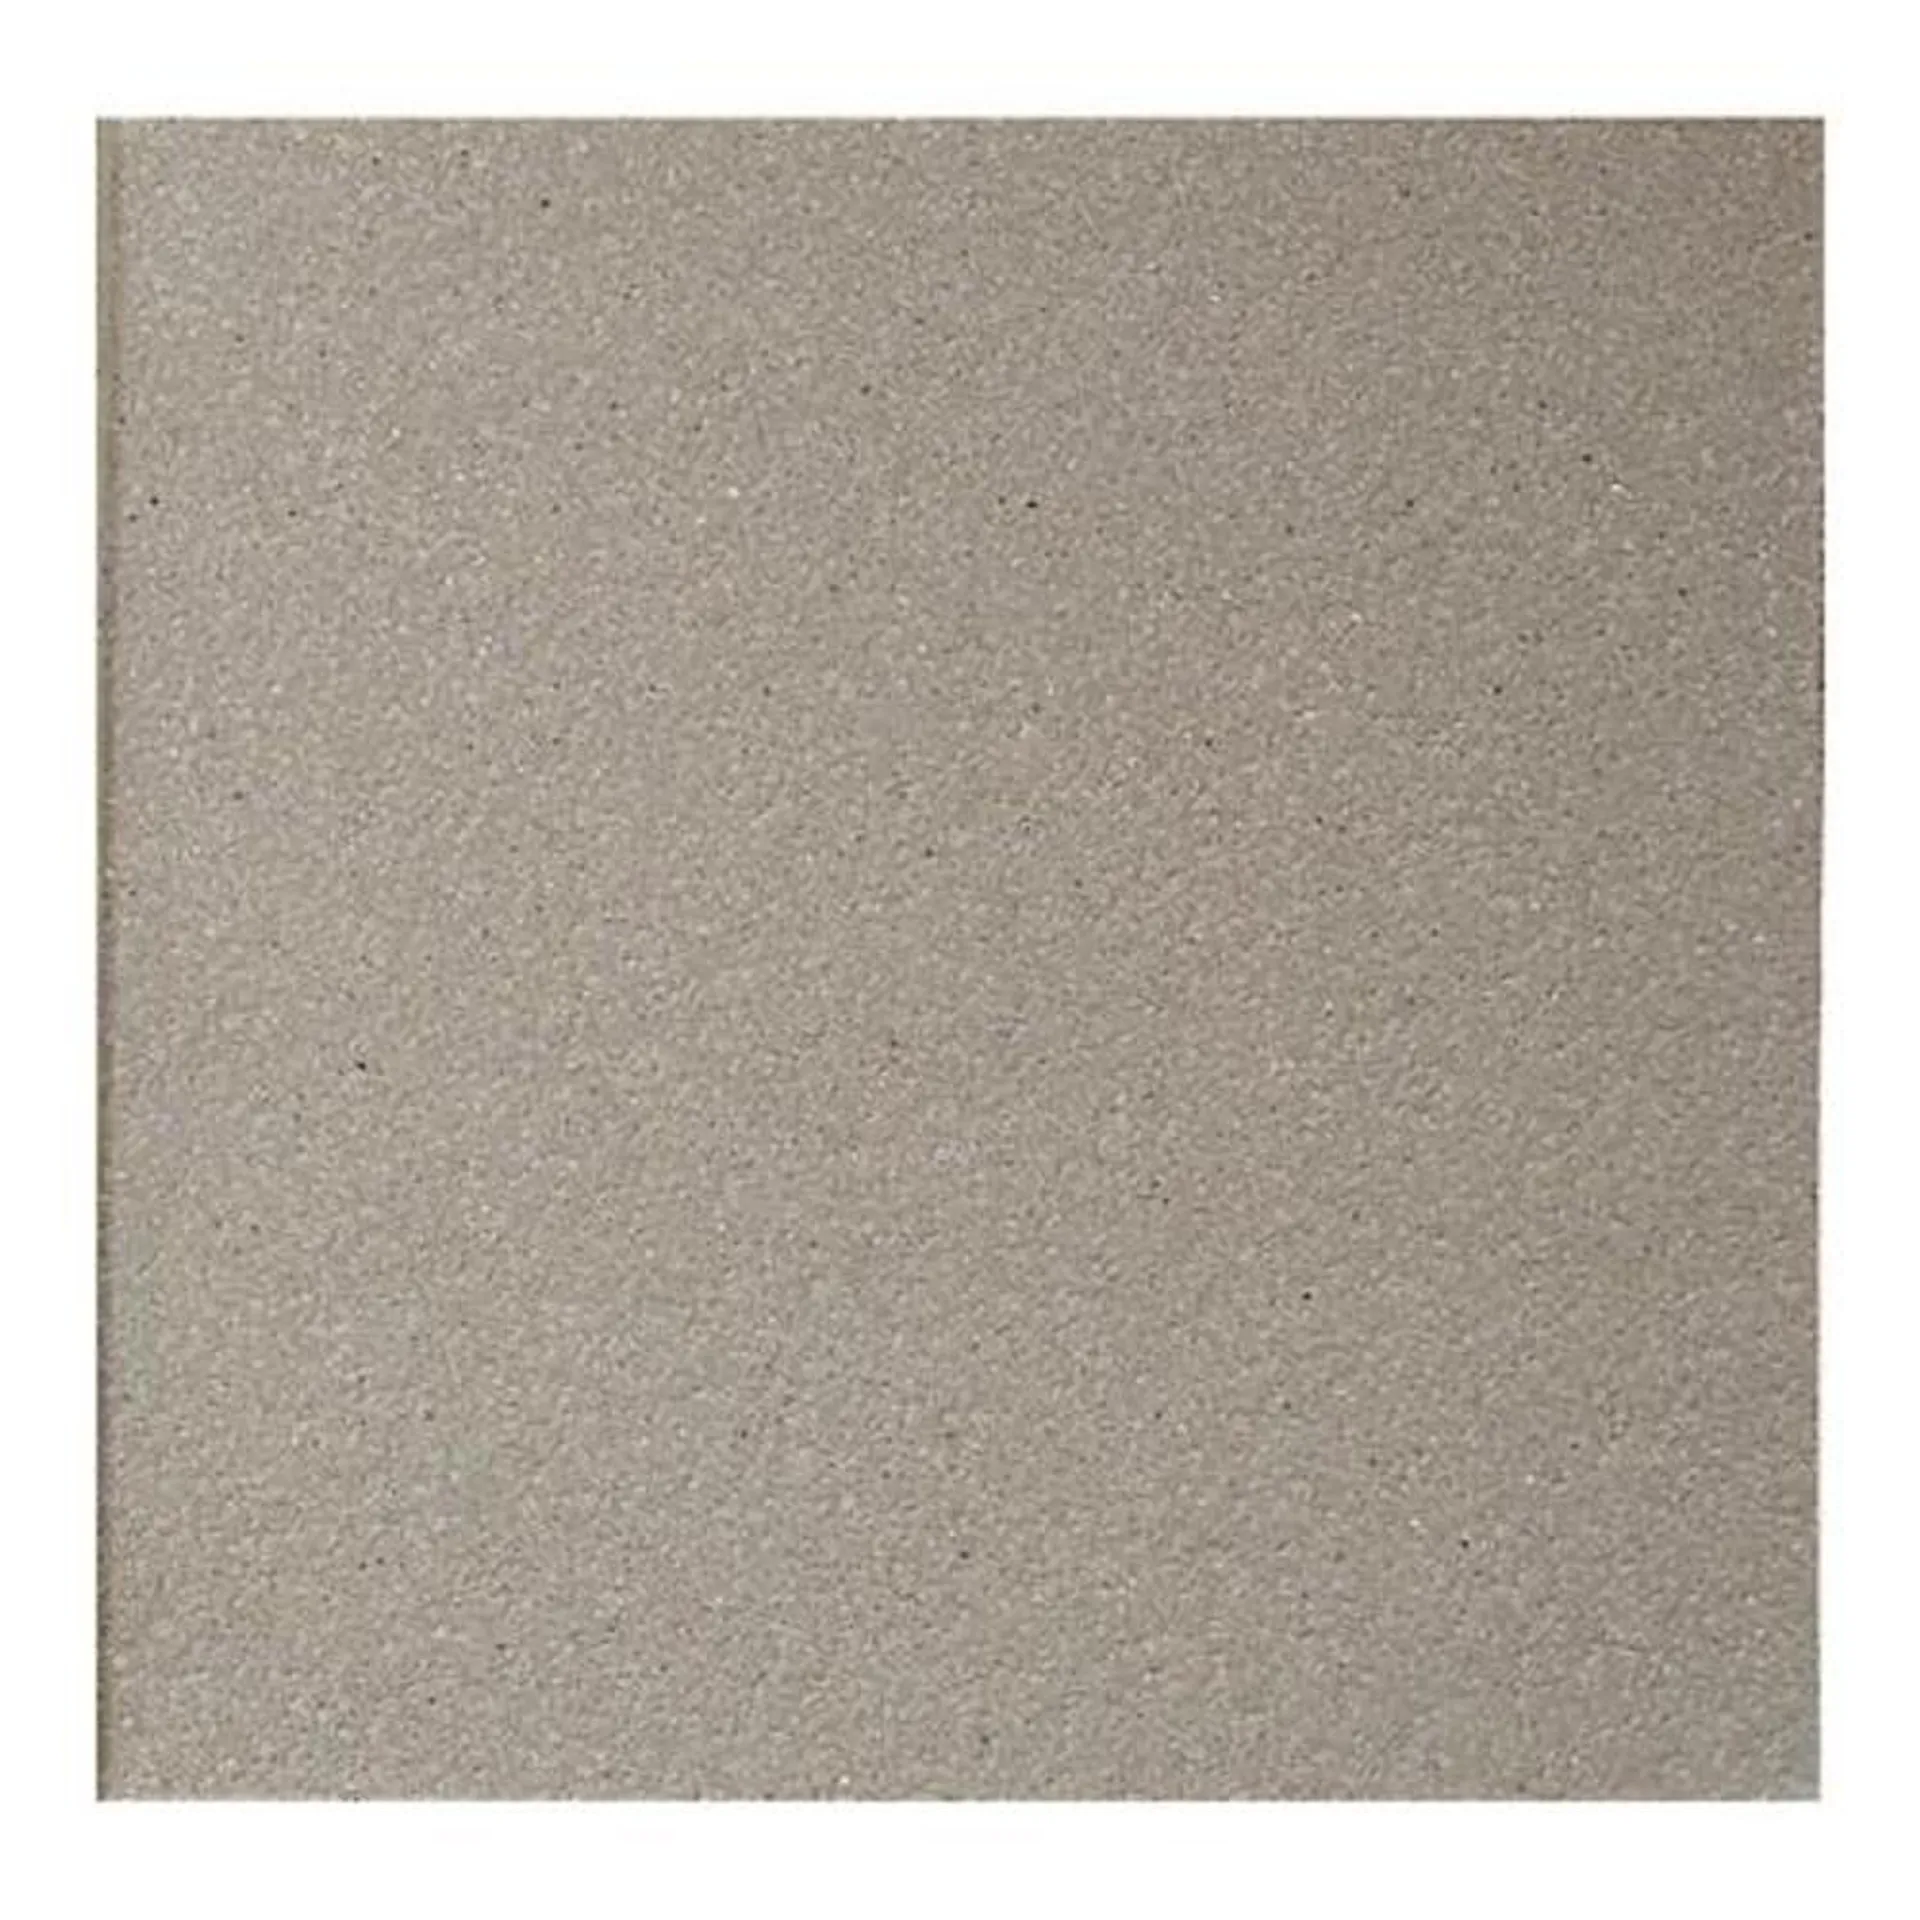 Mohawk® Ashen Gray 6 x 6 Textures Quarry Floor and Wall Tile